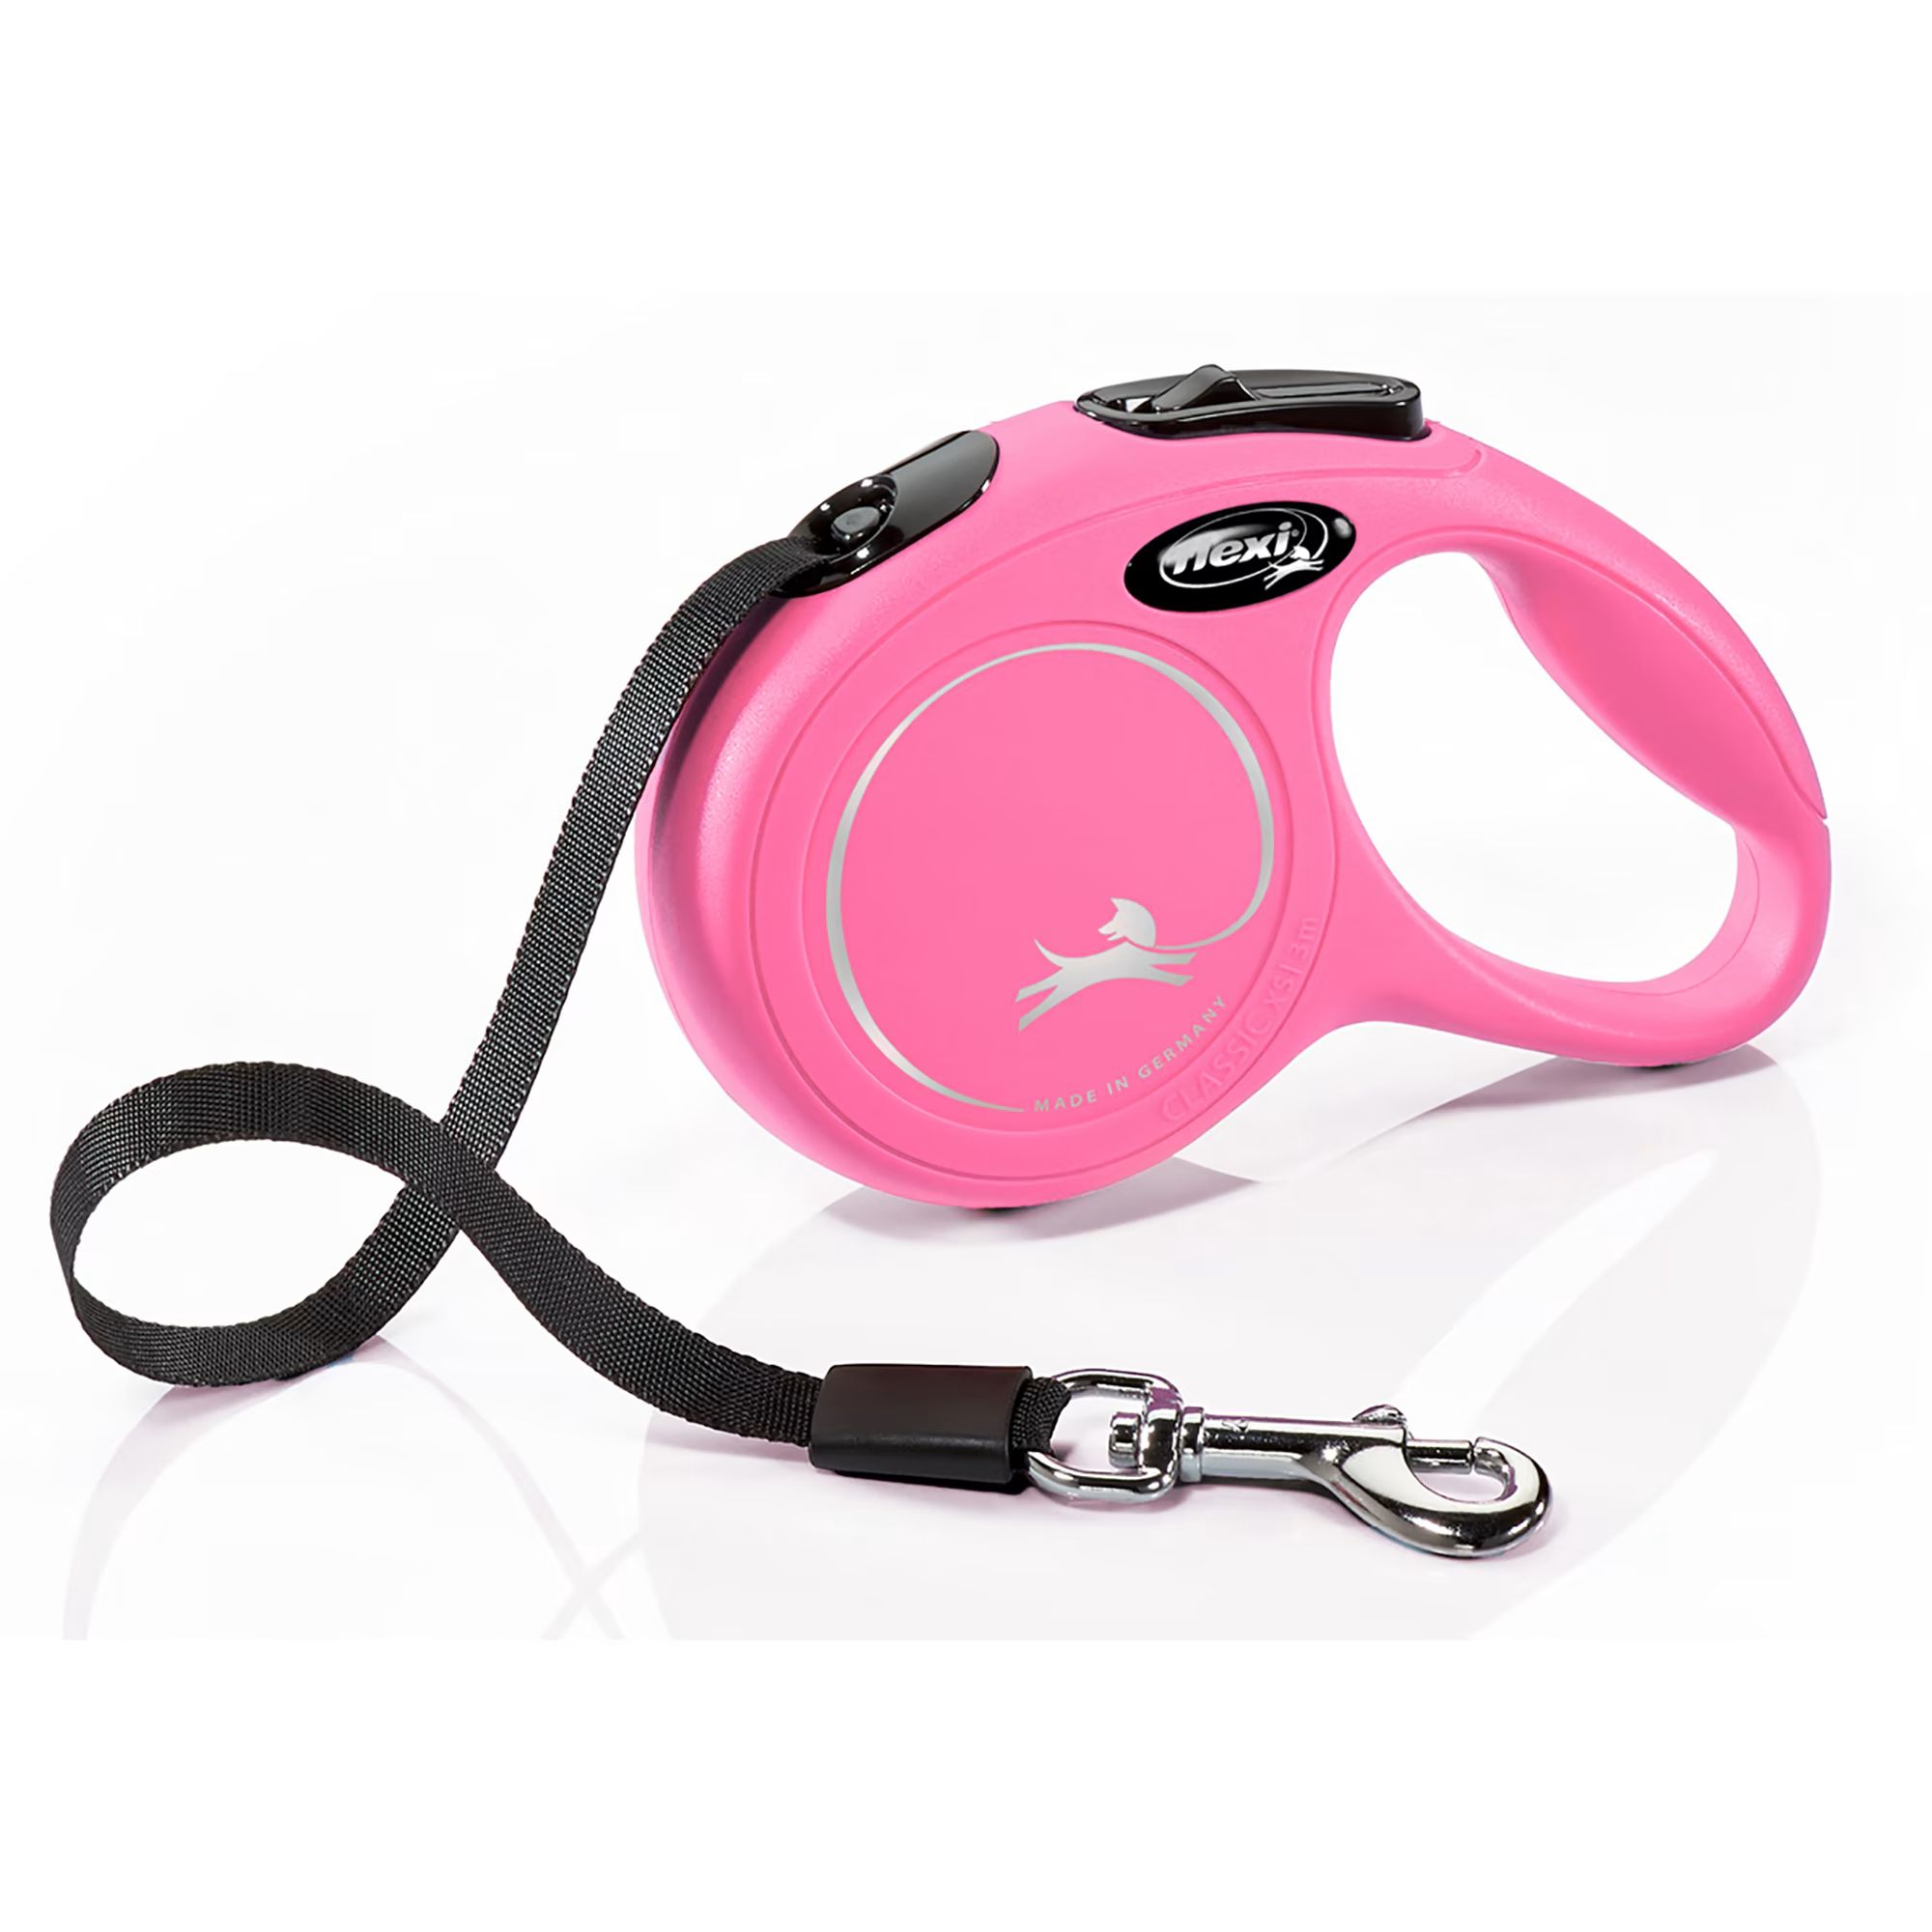 Flexi Classic Retractable Dog Leash in Pink, Extra Small 10' | Petco